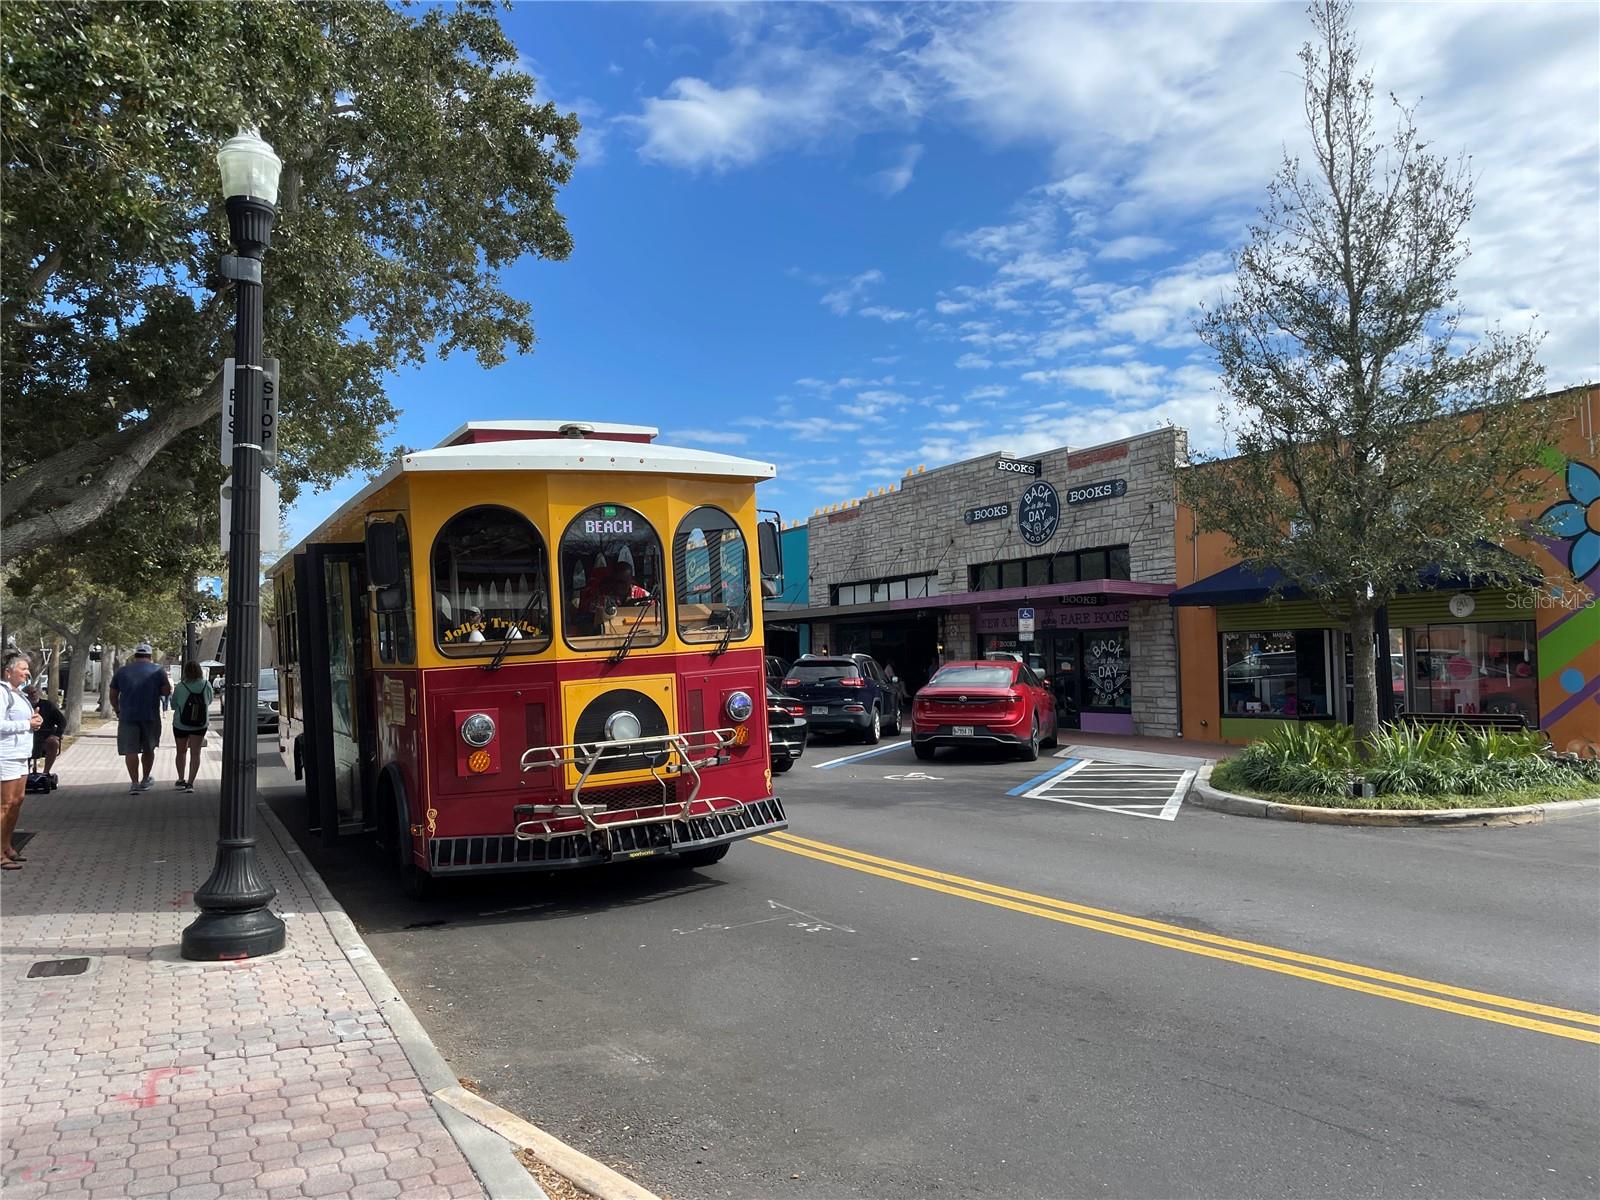 Hop on the Jolly trolly to the world famous Clearwater beach or to many other attractions along the coast